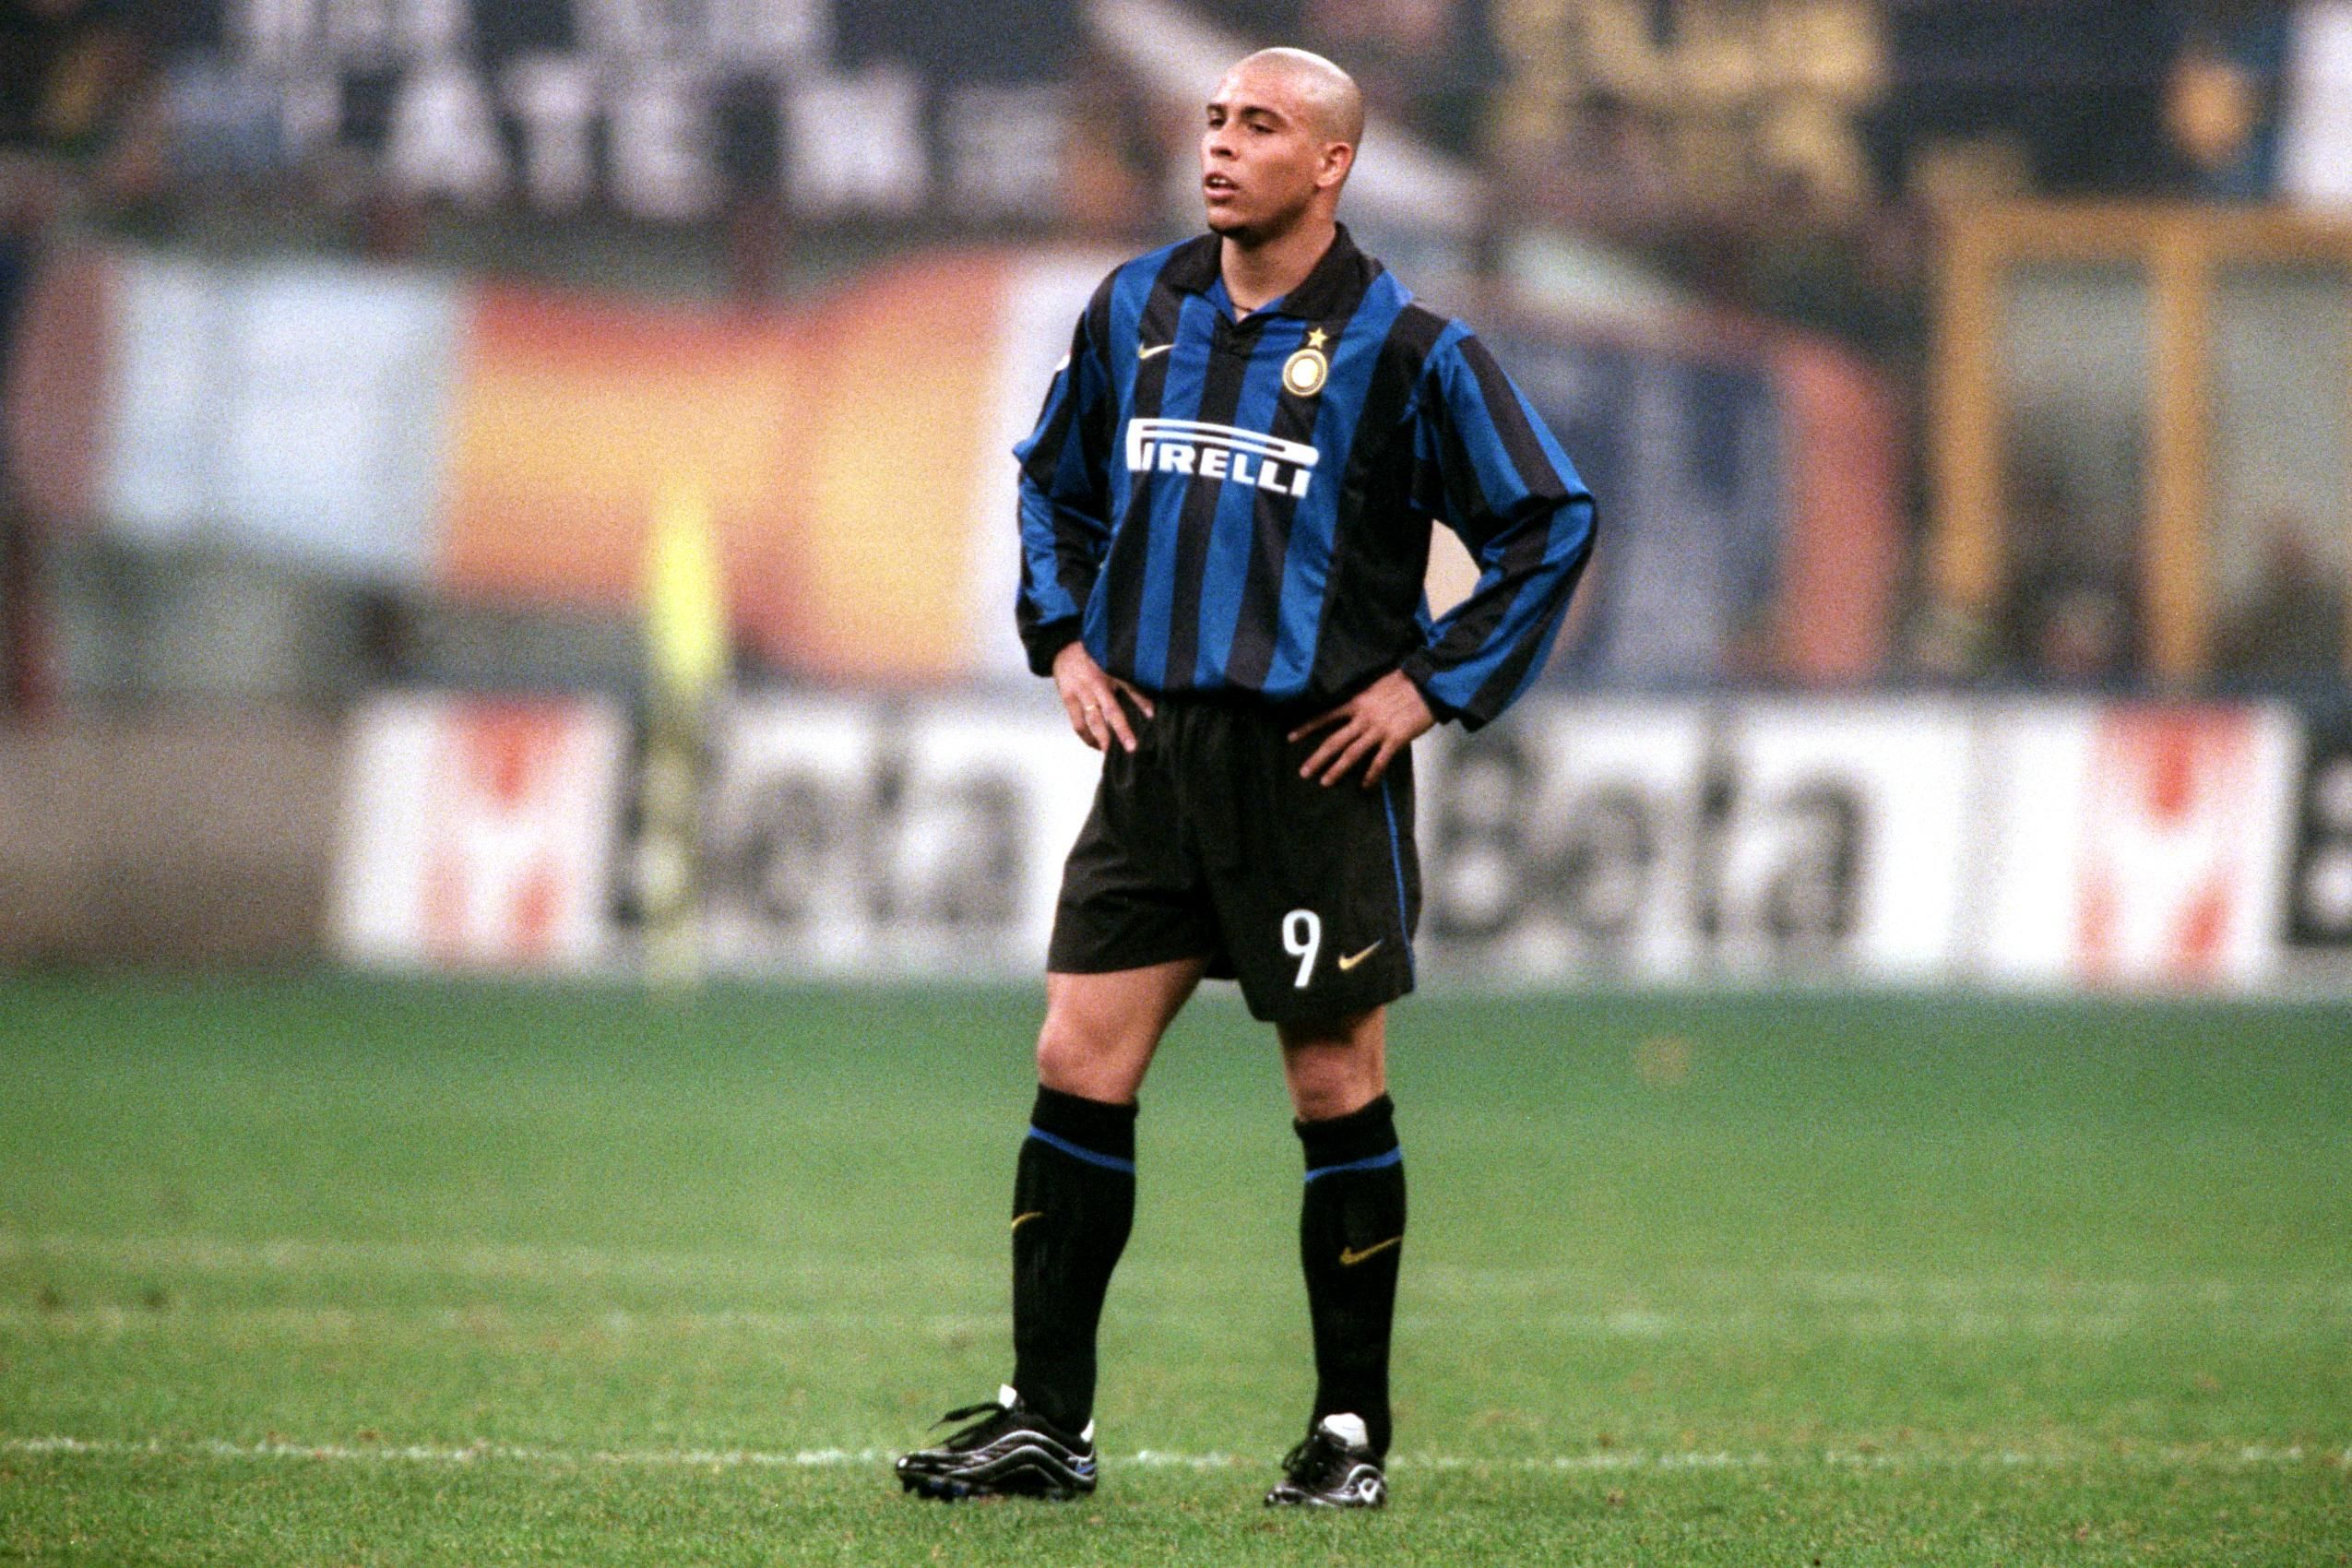 Ronaldo Nazario Suffered One Of Football's Most Horrific Injuries 20 Years Ago Today